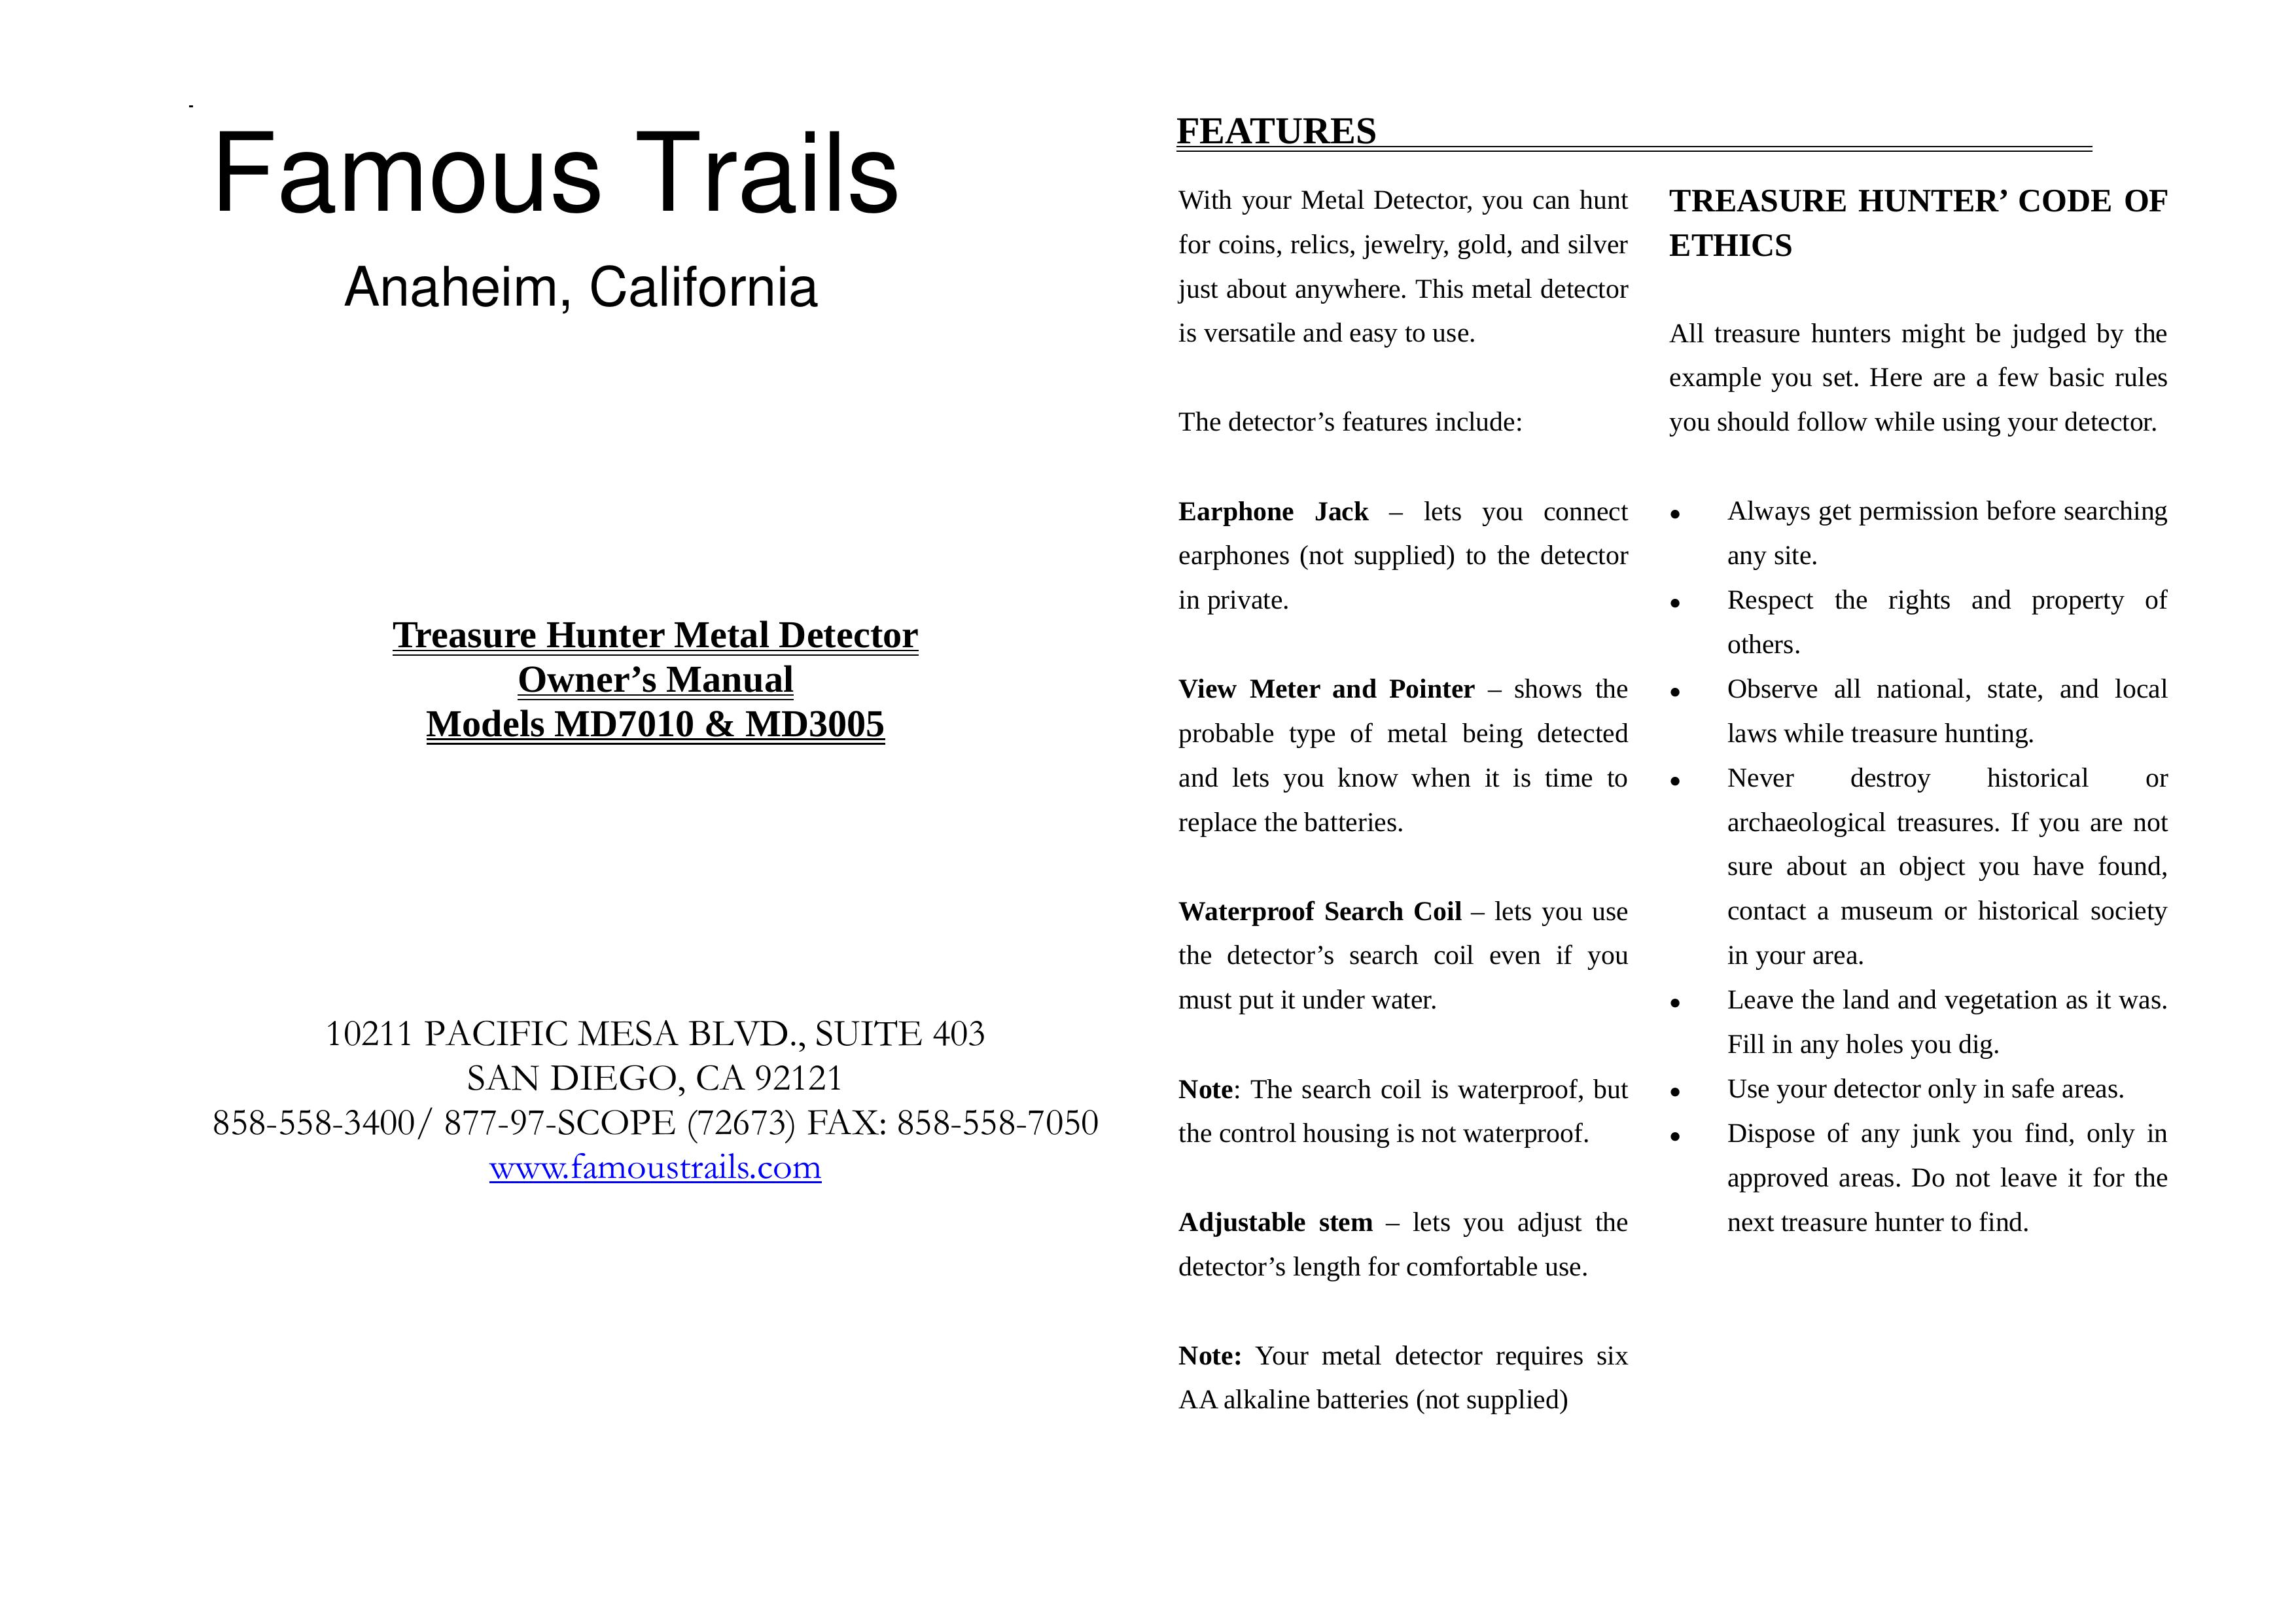 Famous Trails MD3005 Metal Detector User Manual